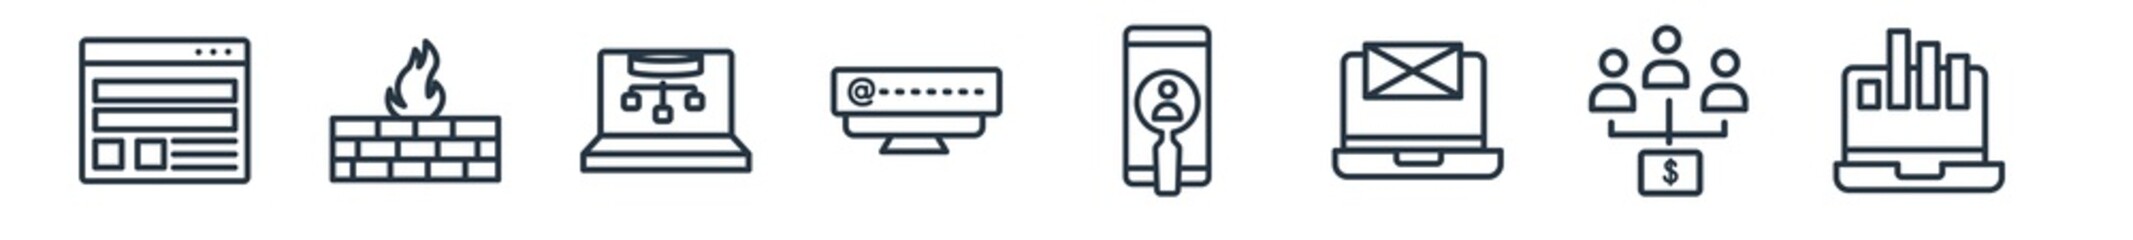 linear set of technology outline icons. line vector icons such as user interface, firewalls, sitemaps, mentions, user research, growth hacking vector illustration.